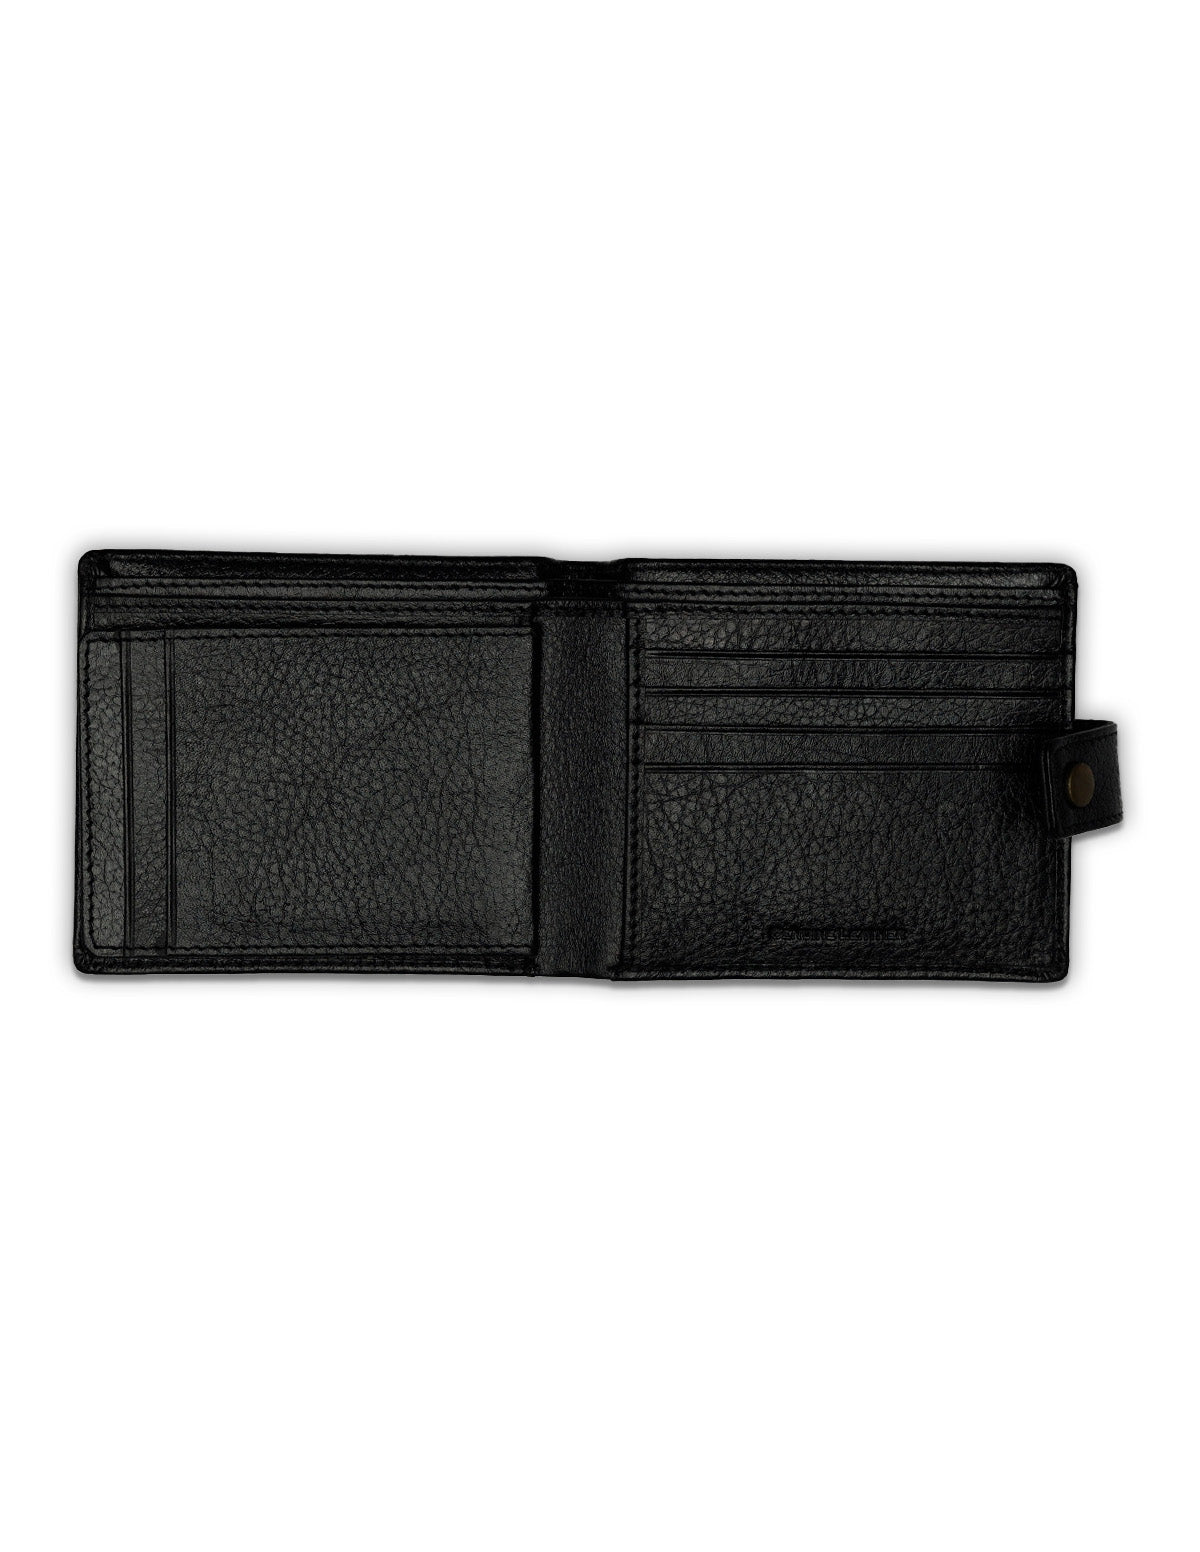 Bifold Leather Wallet with snap closure and ID flap - Black